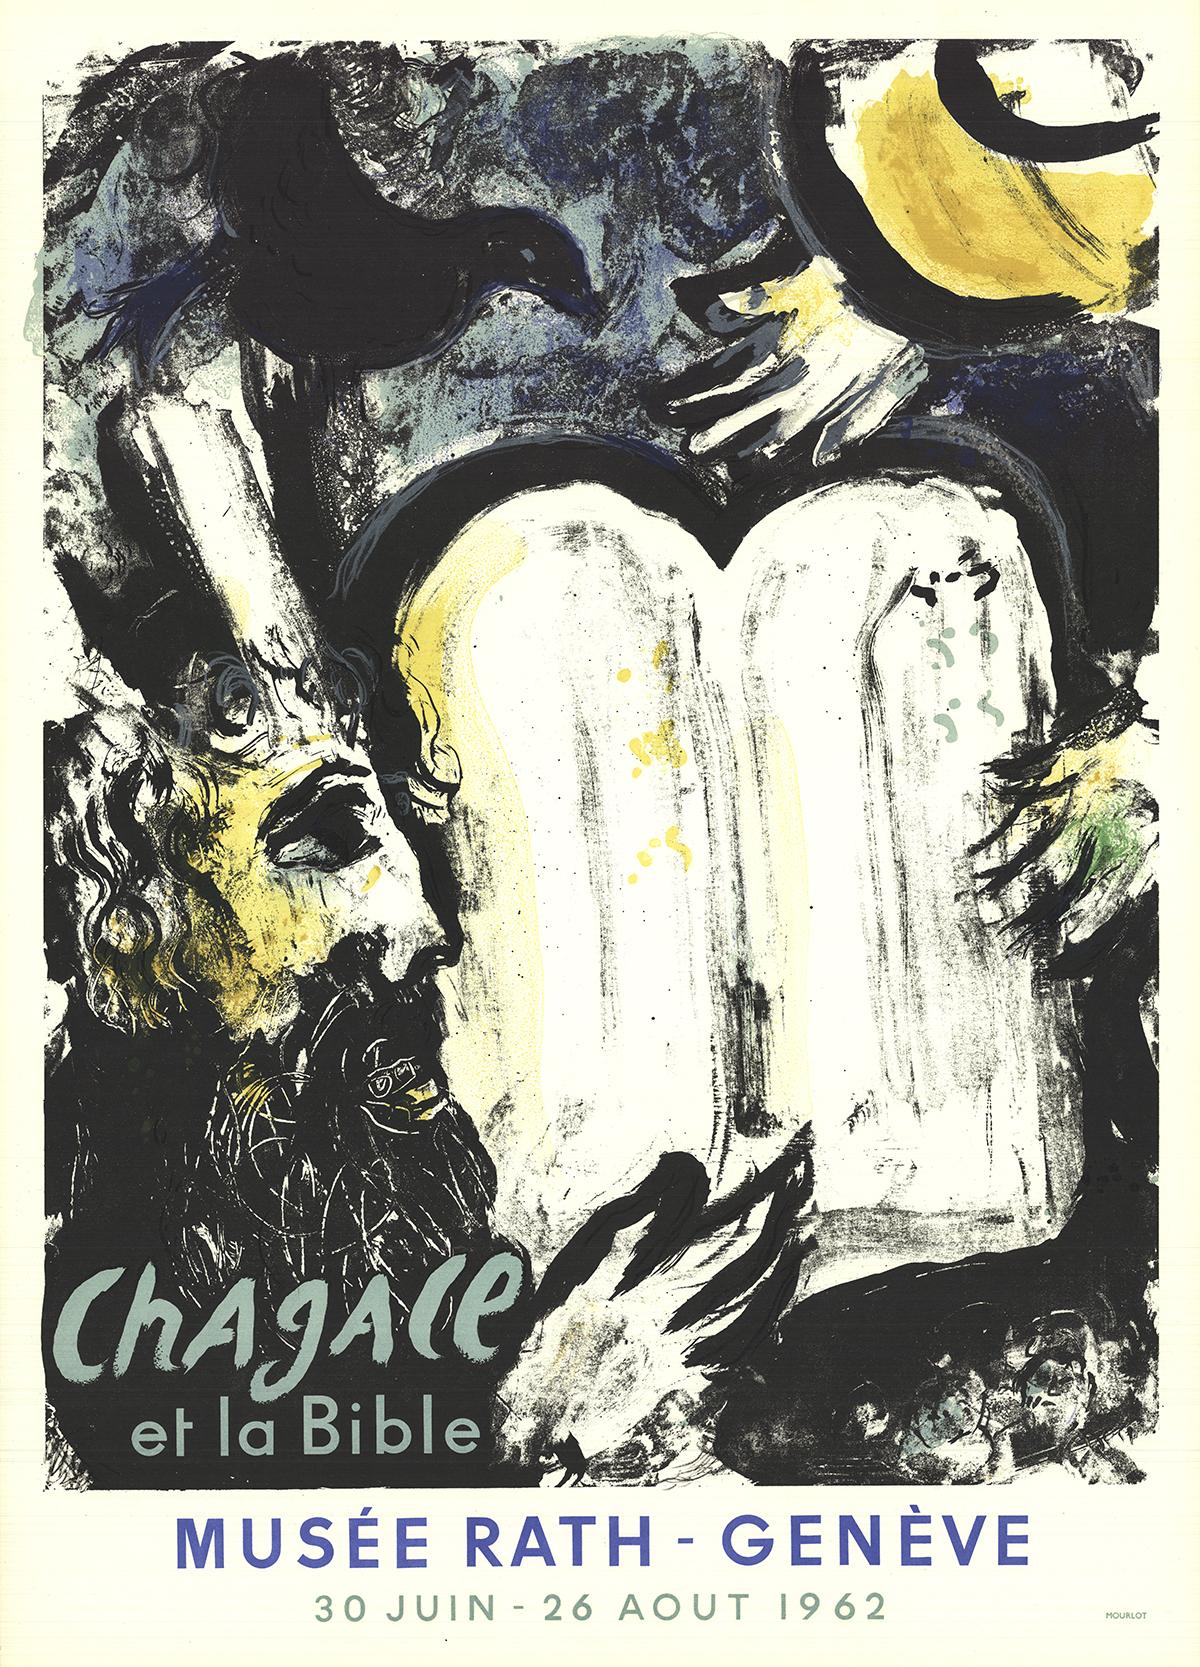 Marc Chagall-Moses and the Tablets of the Law- - Print by (after) Marc Chagall